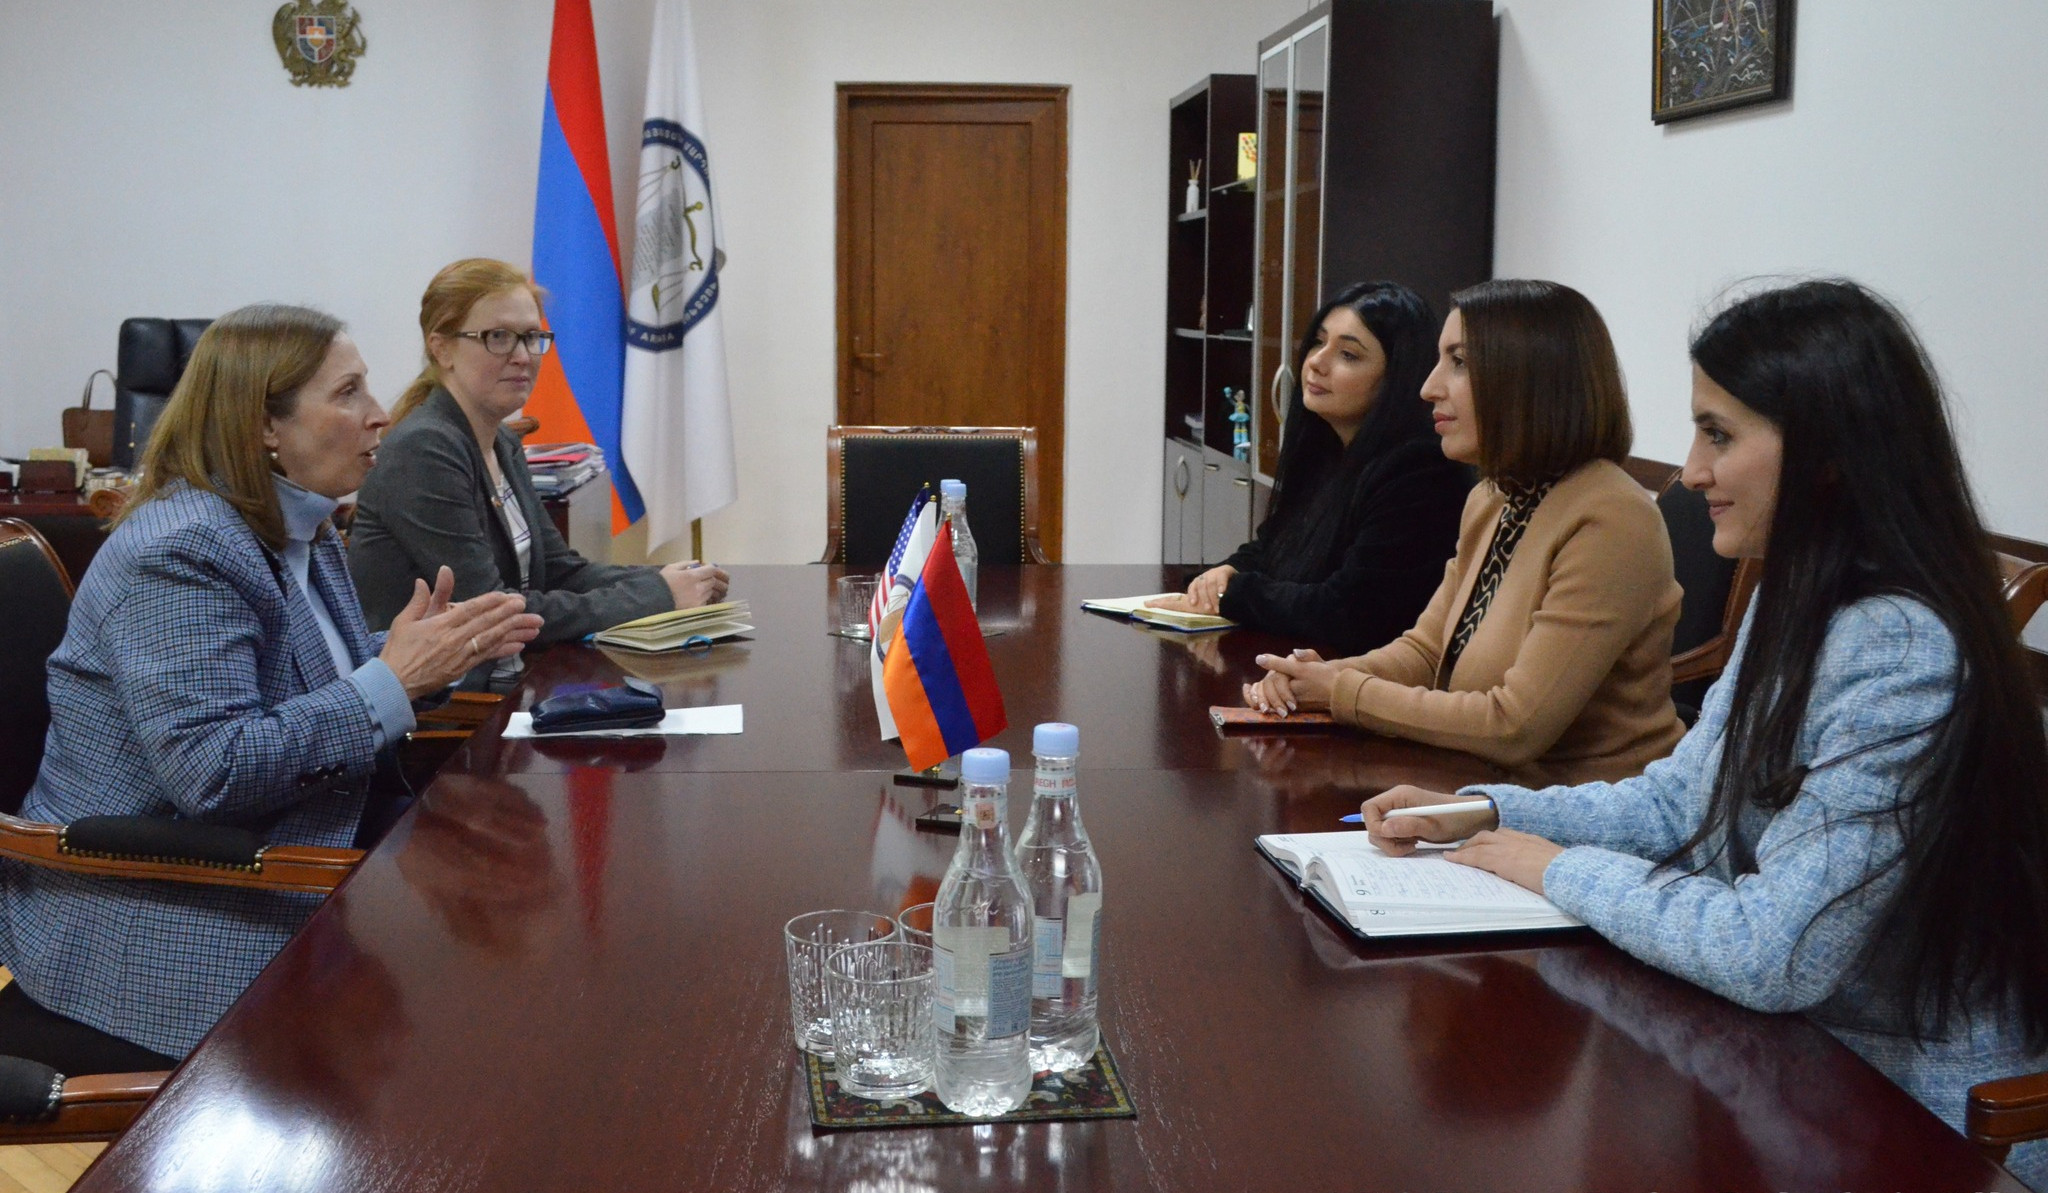 Ms. Kristinne Grigoryan hosted Ambassador Extraordinary and Plenipotentiary of U.S. to Armenia, H.E. Lynn Tracy, who is completing her diplomatic mission in Armenia